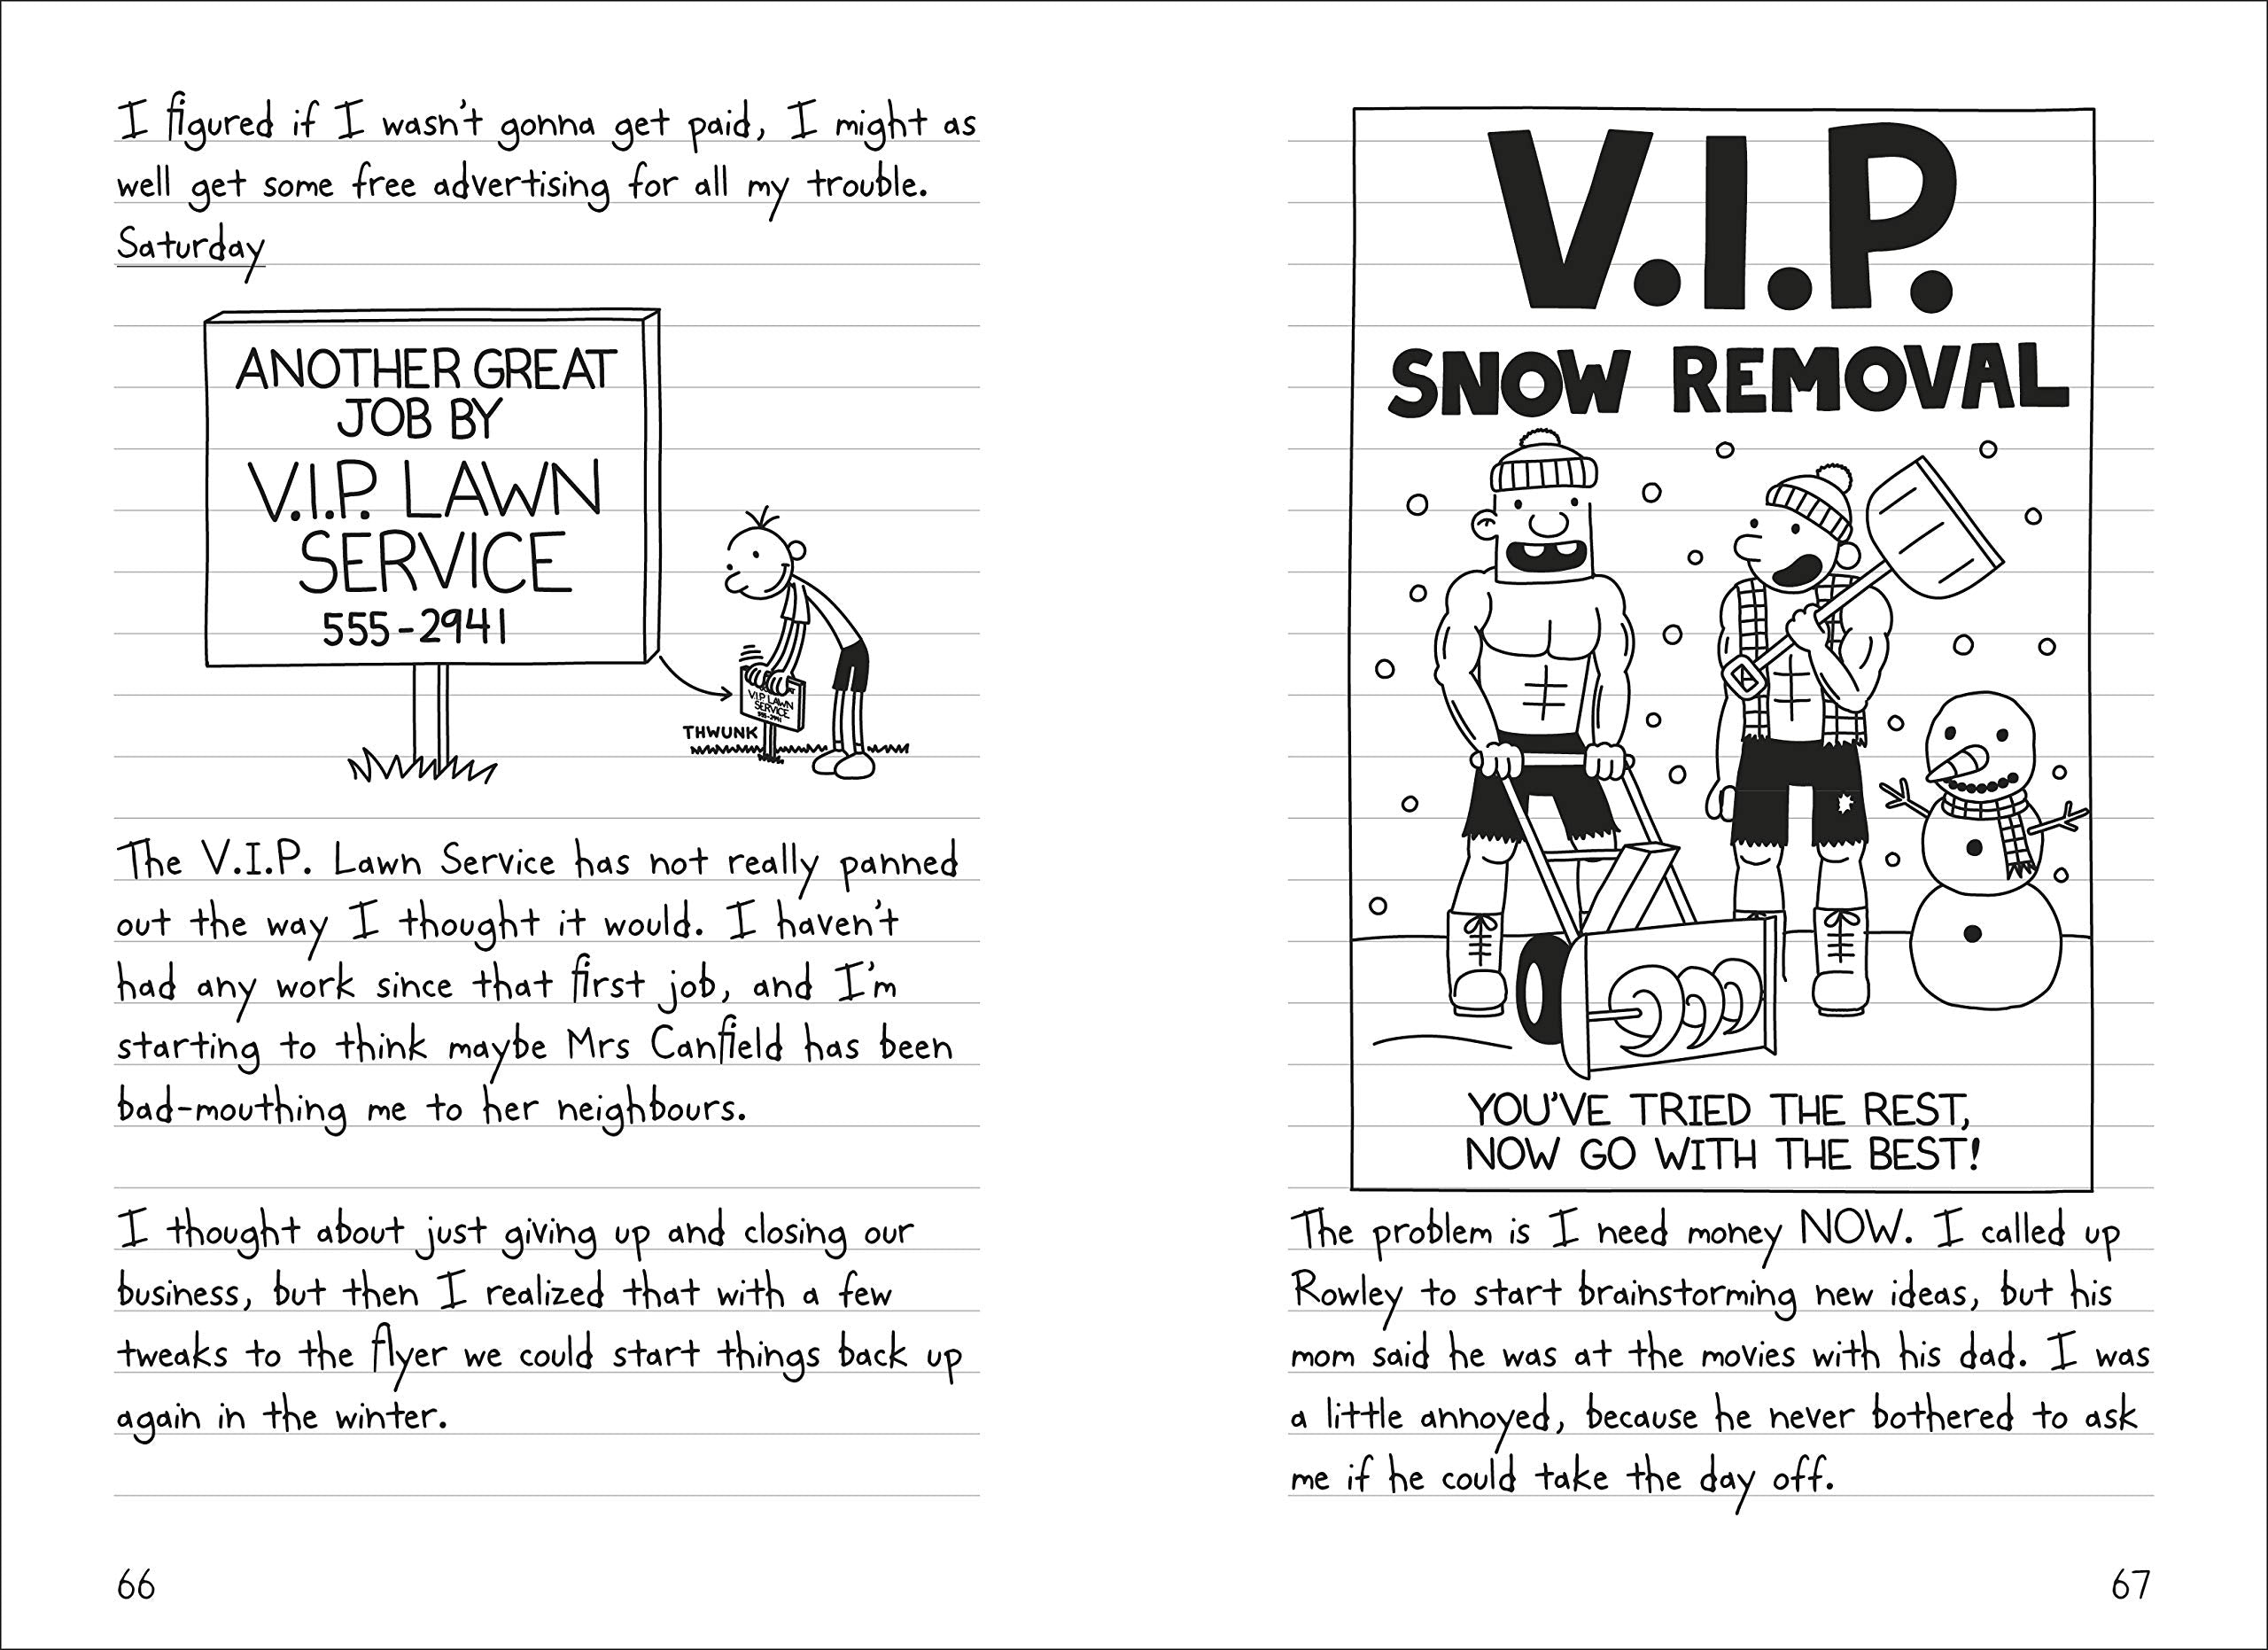 Diary of a Wimpy Kid (4) : Dog Days